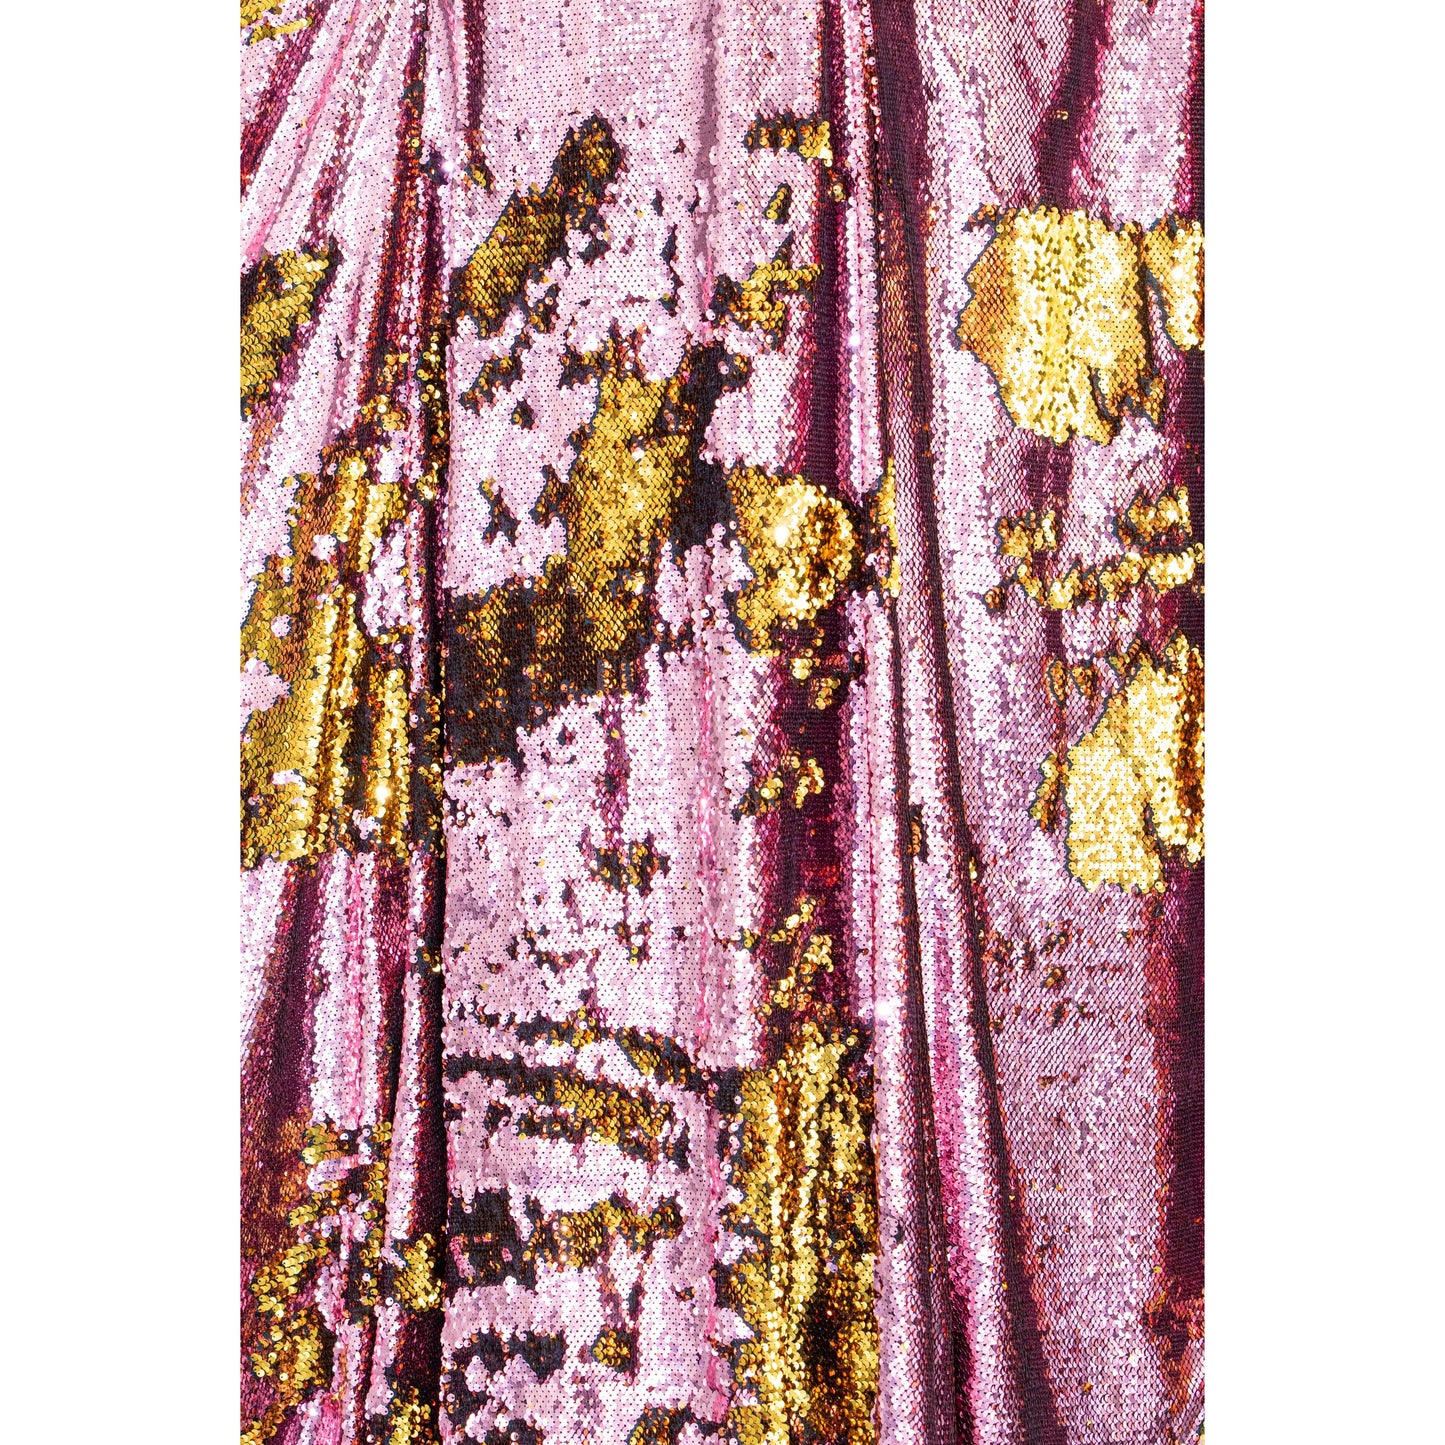 Pink Champagne Sequin Playsuit Cape